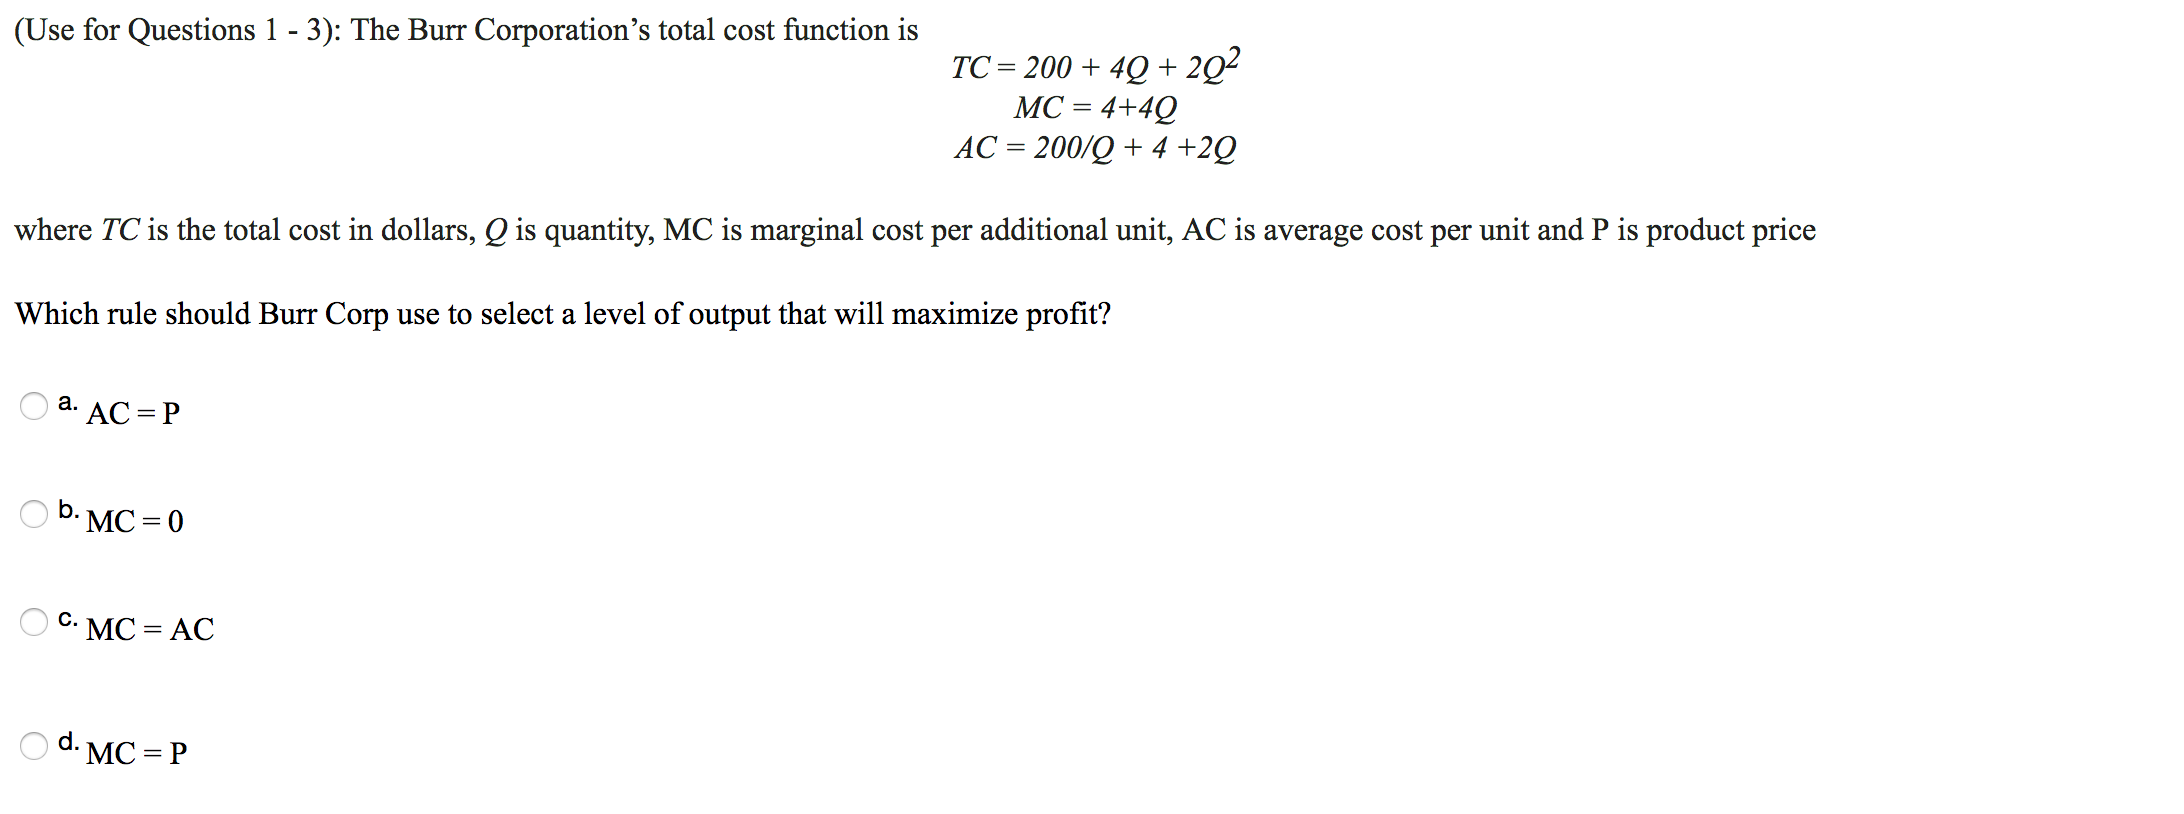 (Use for Questions 1 - 3): The Burr Corporation's total cost function is
TC 2004Q+2Q2
МС - 4+40
АС %3 200/Q + 4 +2Q
where TC is the total cost in dollars, Q is quantity, MC is marginal cost per additional unit, AC is average cost per unit and P is product price
Which rule should Burr Corp use to select a level of output that will maximize profit?
а.
*AC P
-МC%3D0
с.
MC AC
d.
:МС - Р
